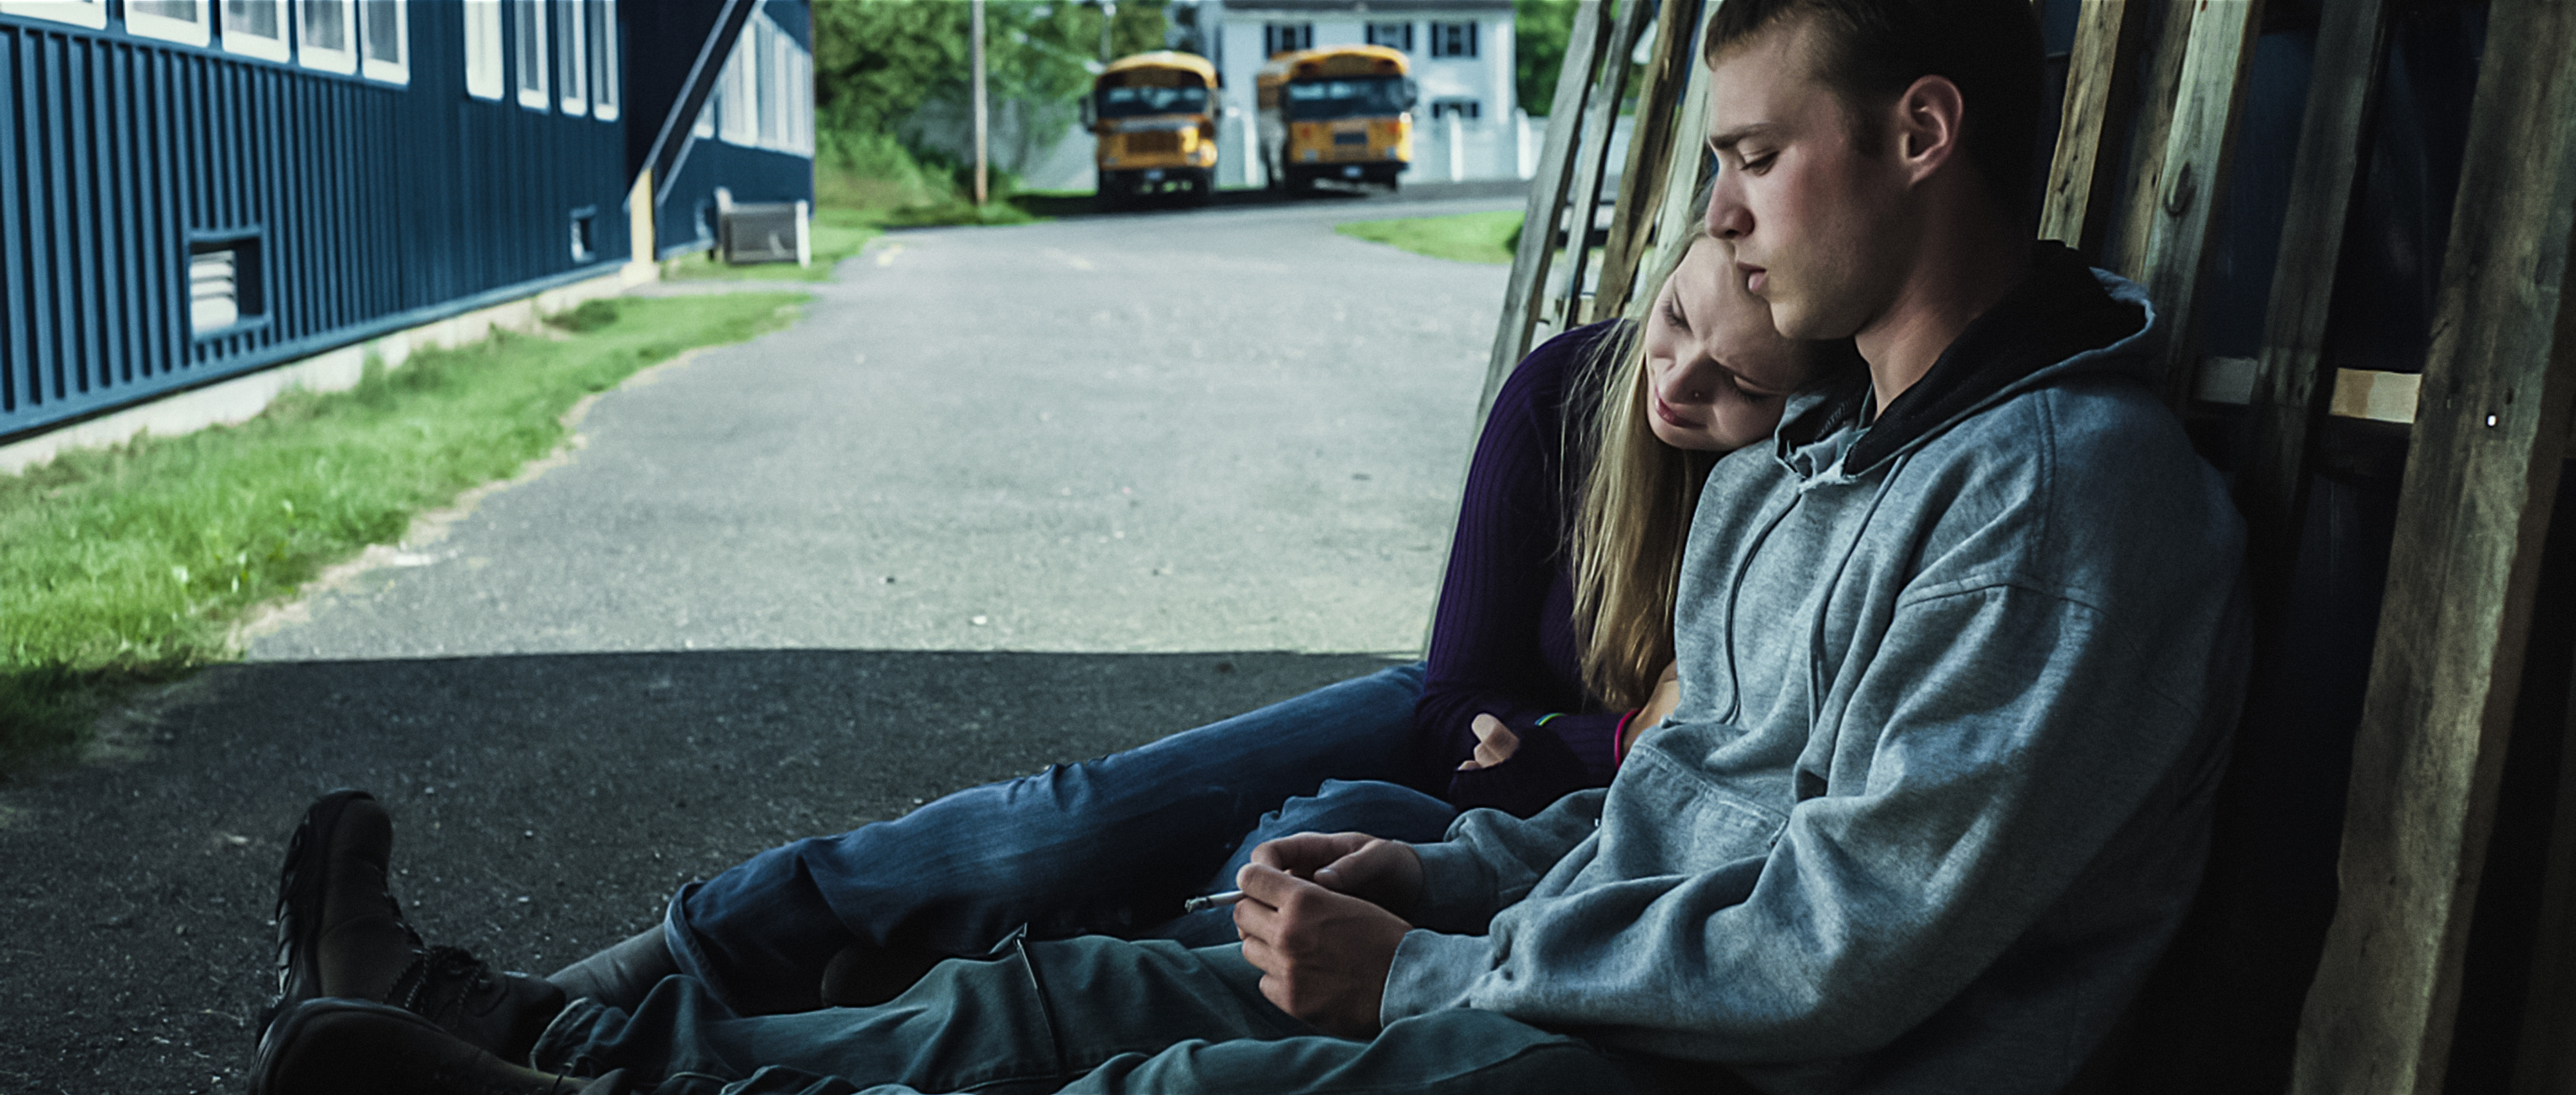 Still of Emory Cohen and Zoe Levin in Beneath the Harvest Sky (2013)